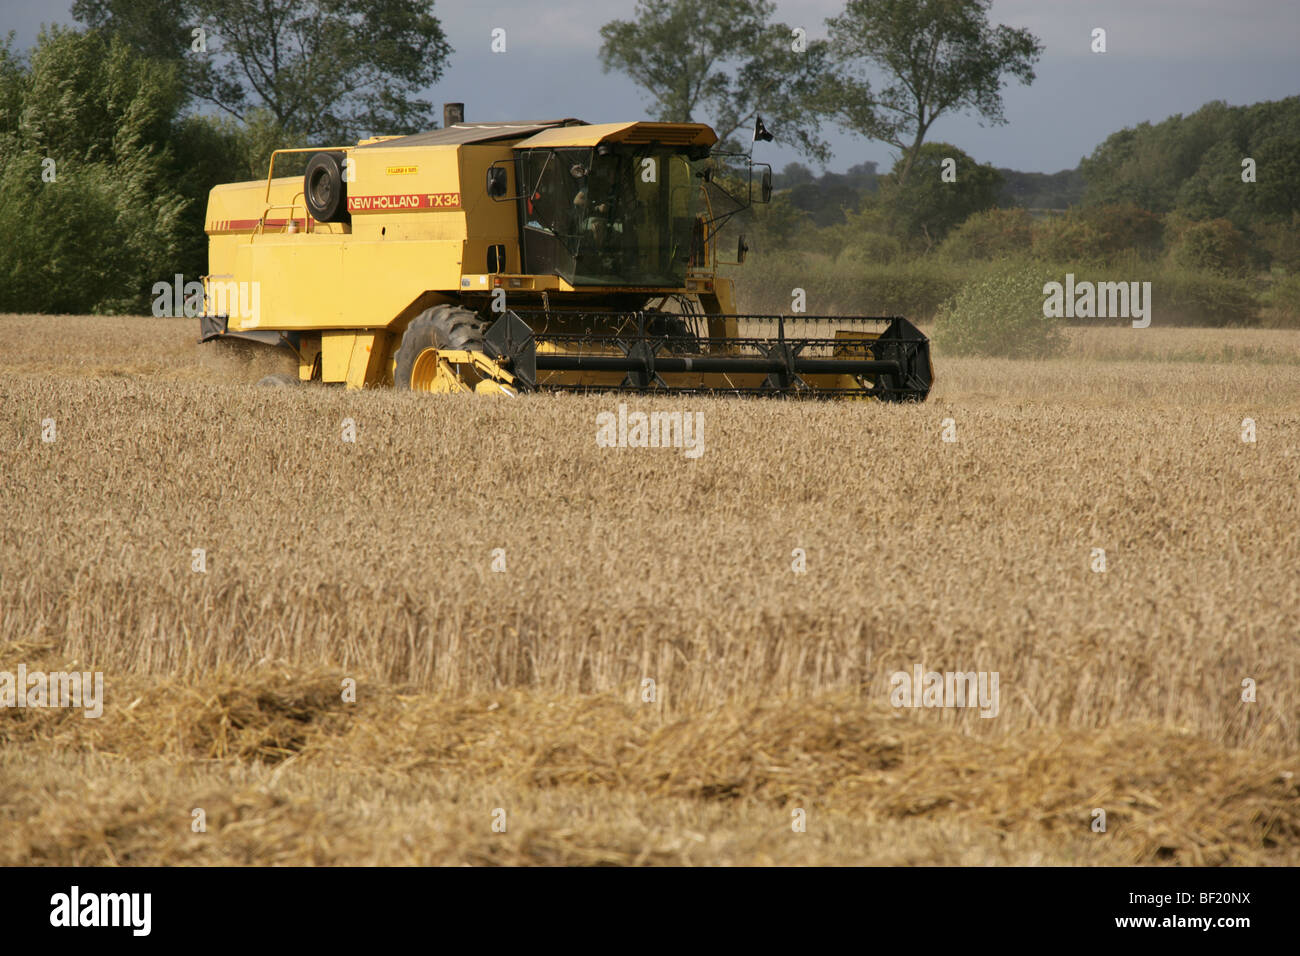 Village of Coddington, England. A New Holland TX34 Meca combine harvester at work in a Cheshire field. Stock Photo